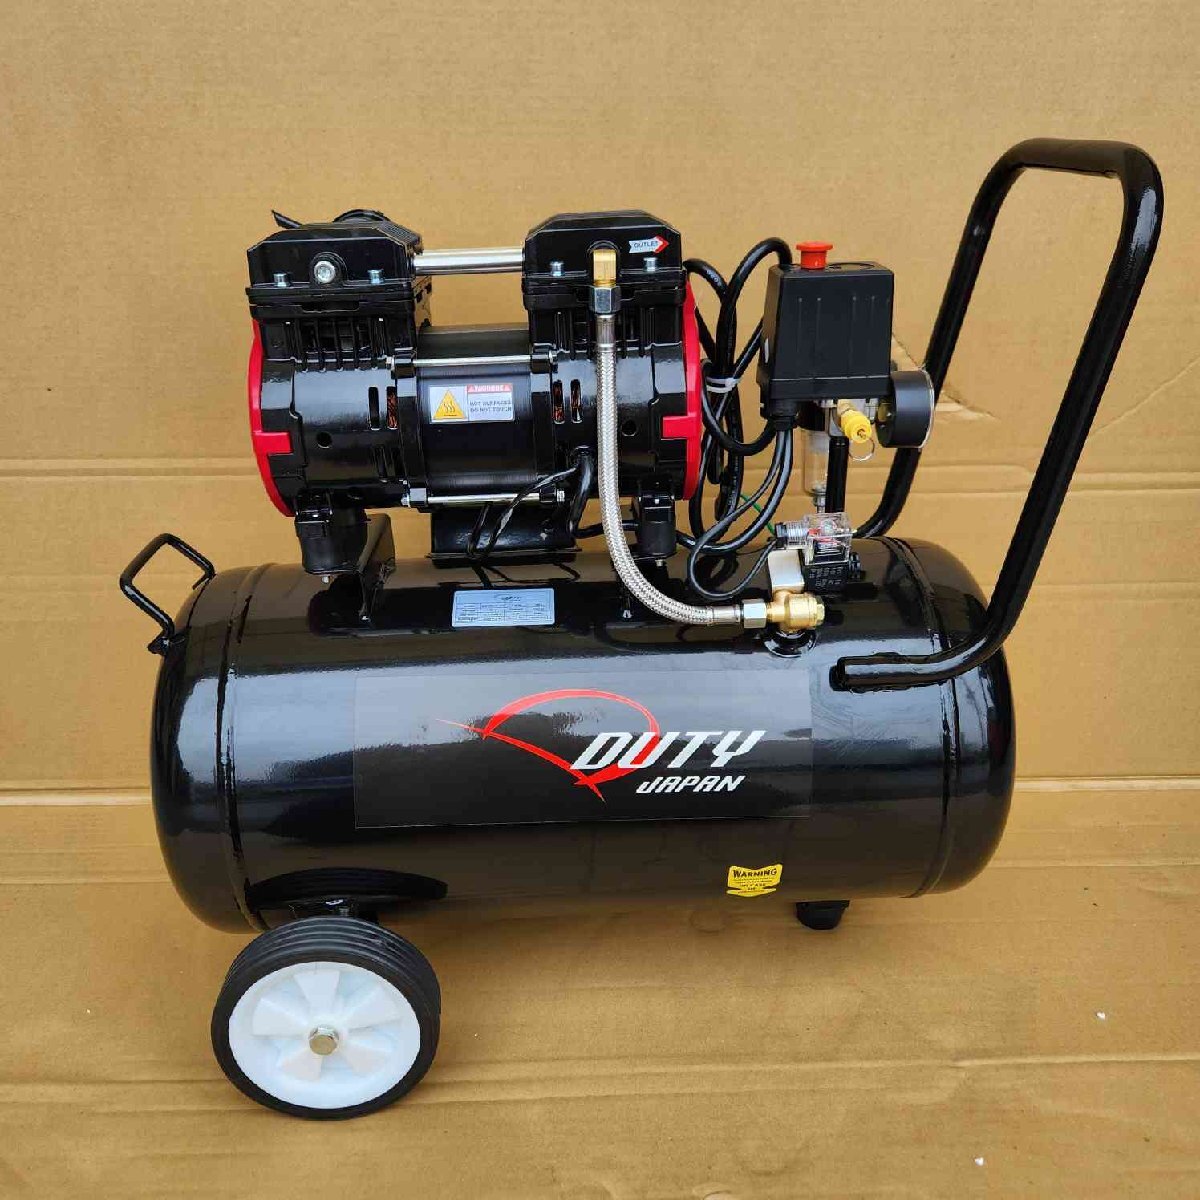  new model high speed motor installing super quiet sound horizontal oil less compressor 40L tanker installing 100V 3 months with guarantee 